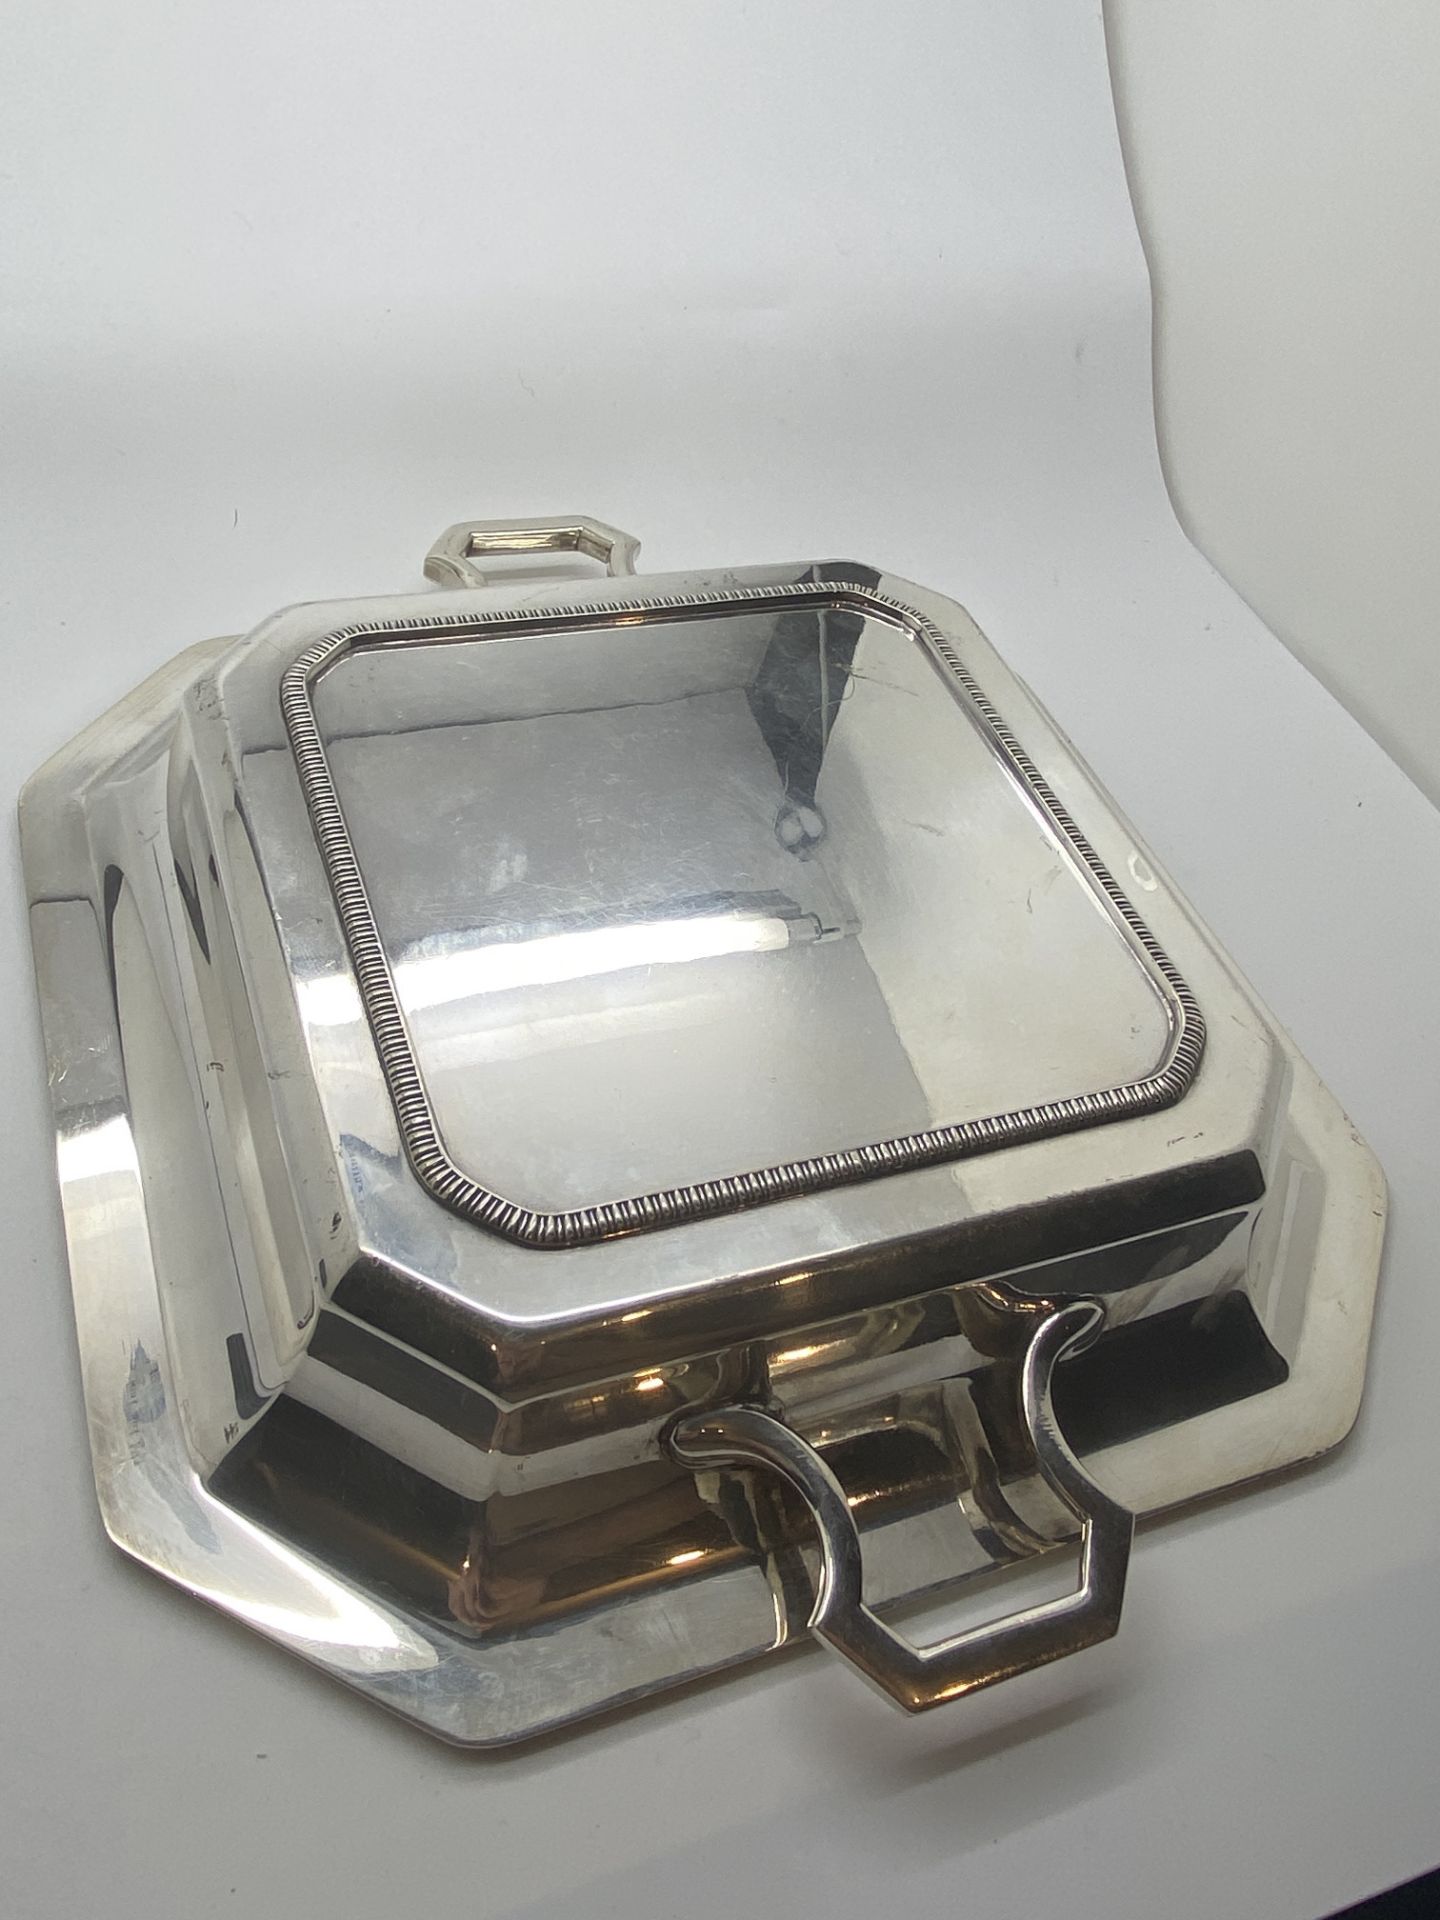 HEAVY SILVER COLOURED METAL TRAY APPROX 8.5" X 8.5" - Image 4 of 4